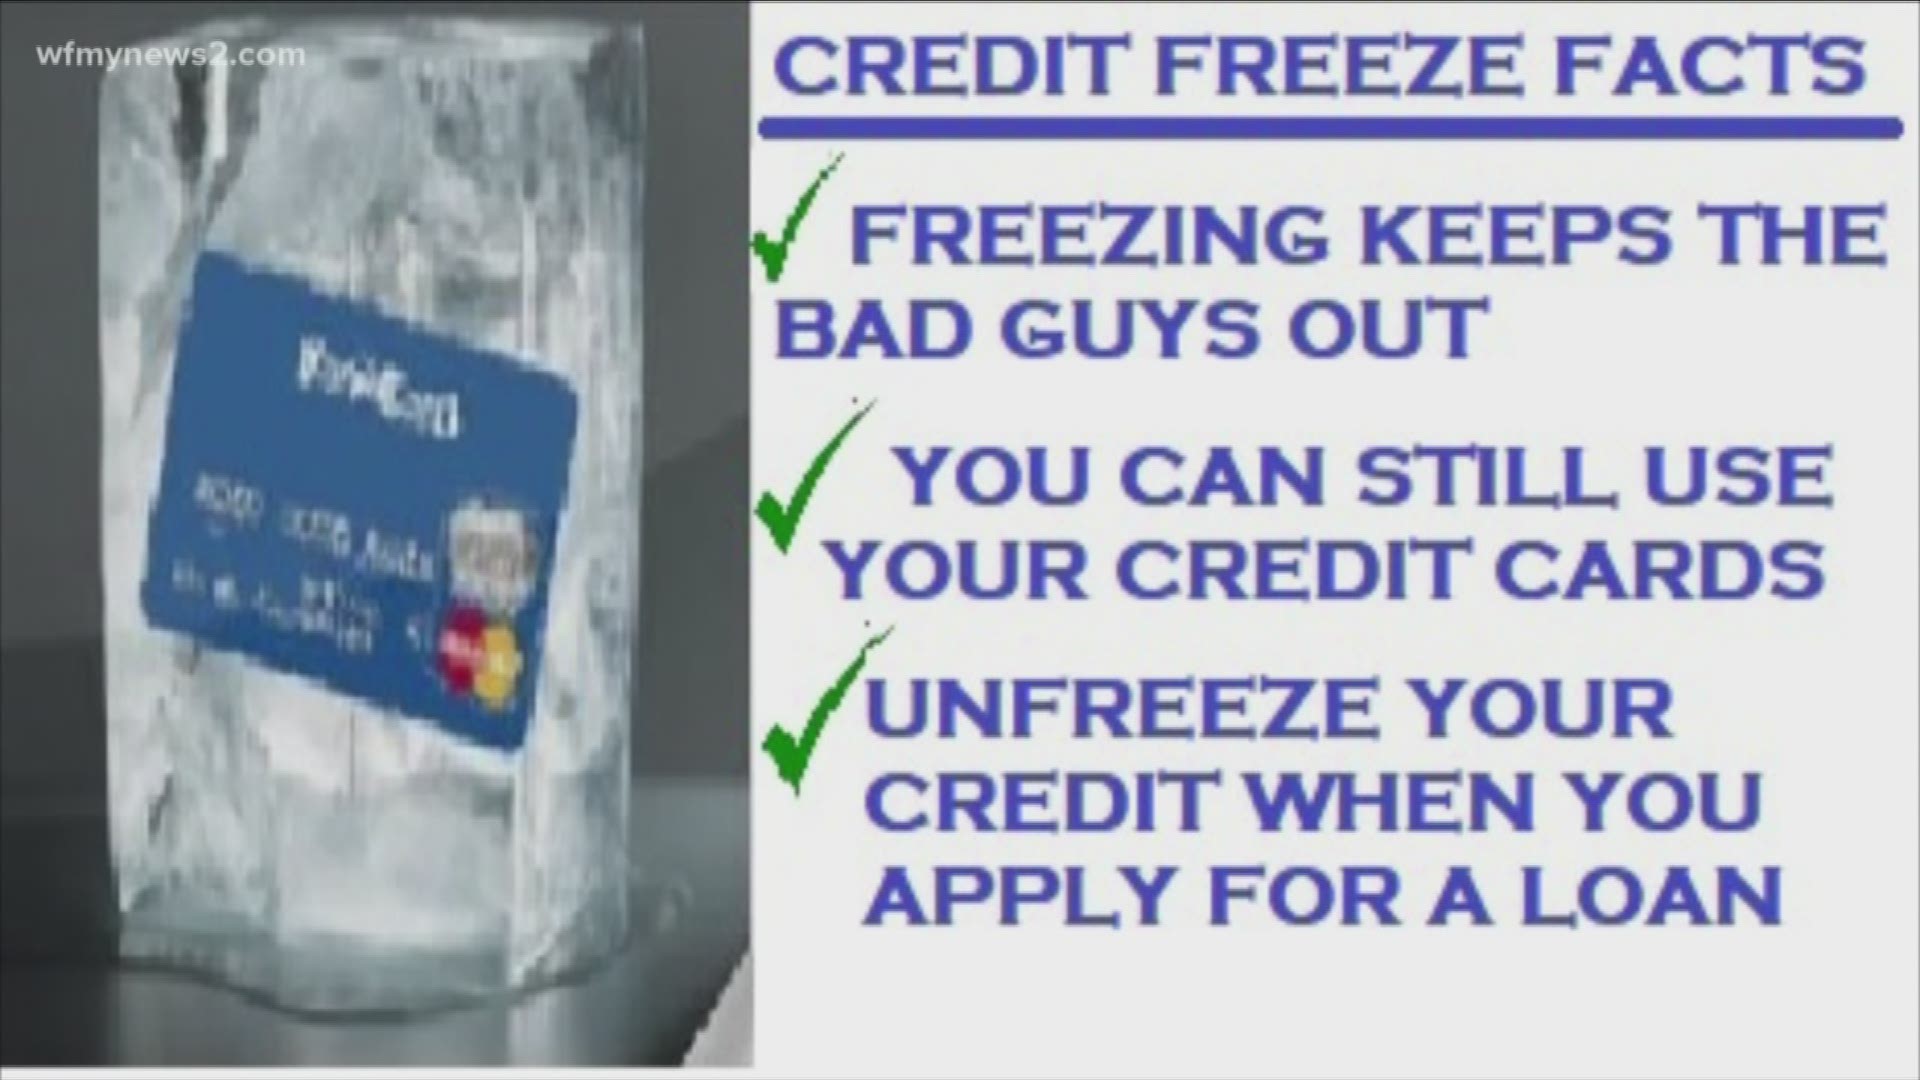 The Data breach is a good occasion to freeze your credit.